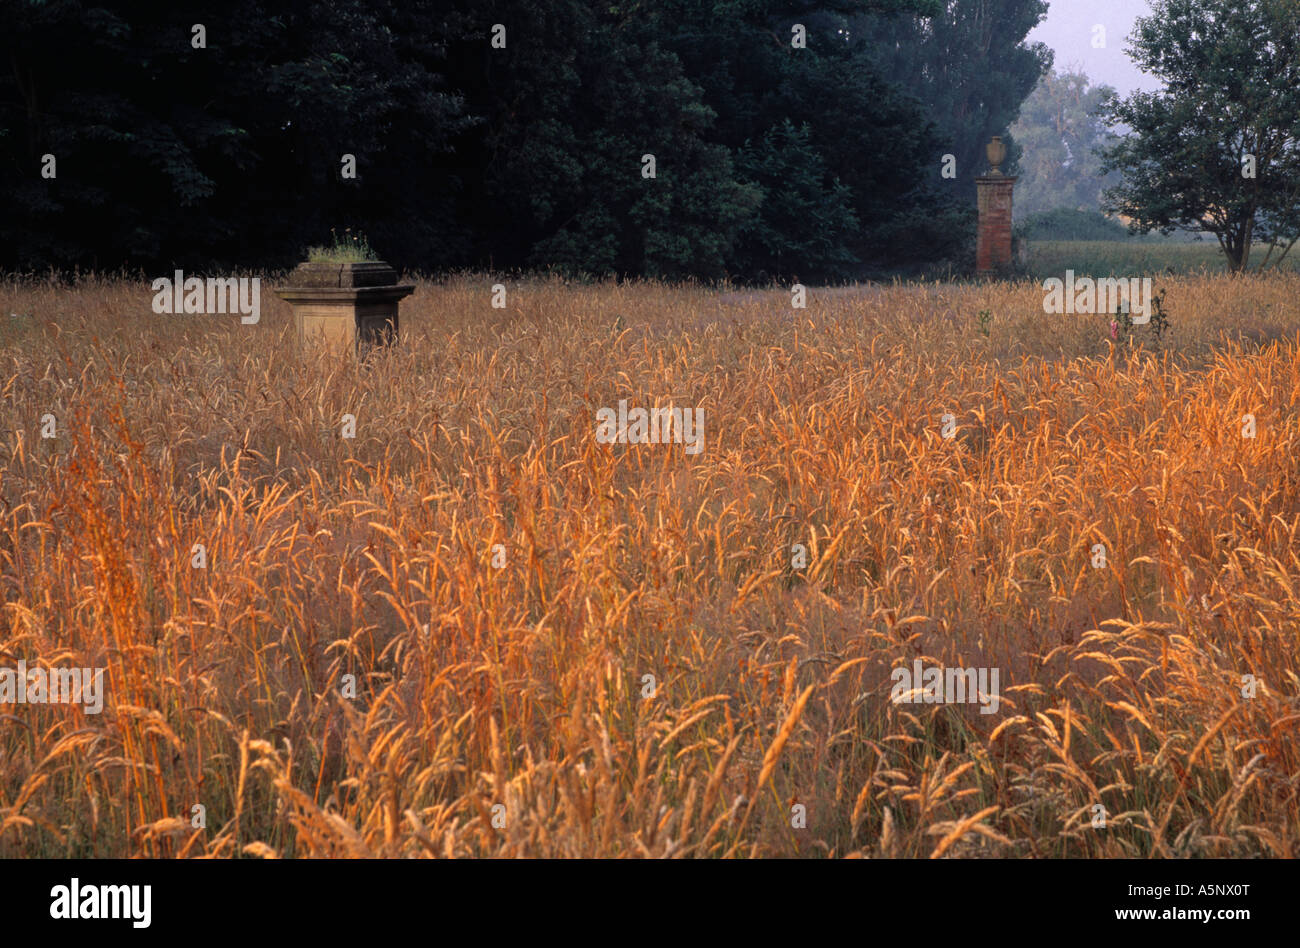 Field of wheat growing at Wellingham Barn Stock Photo